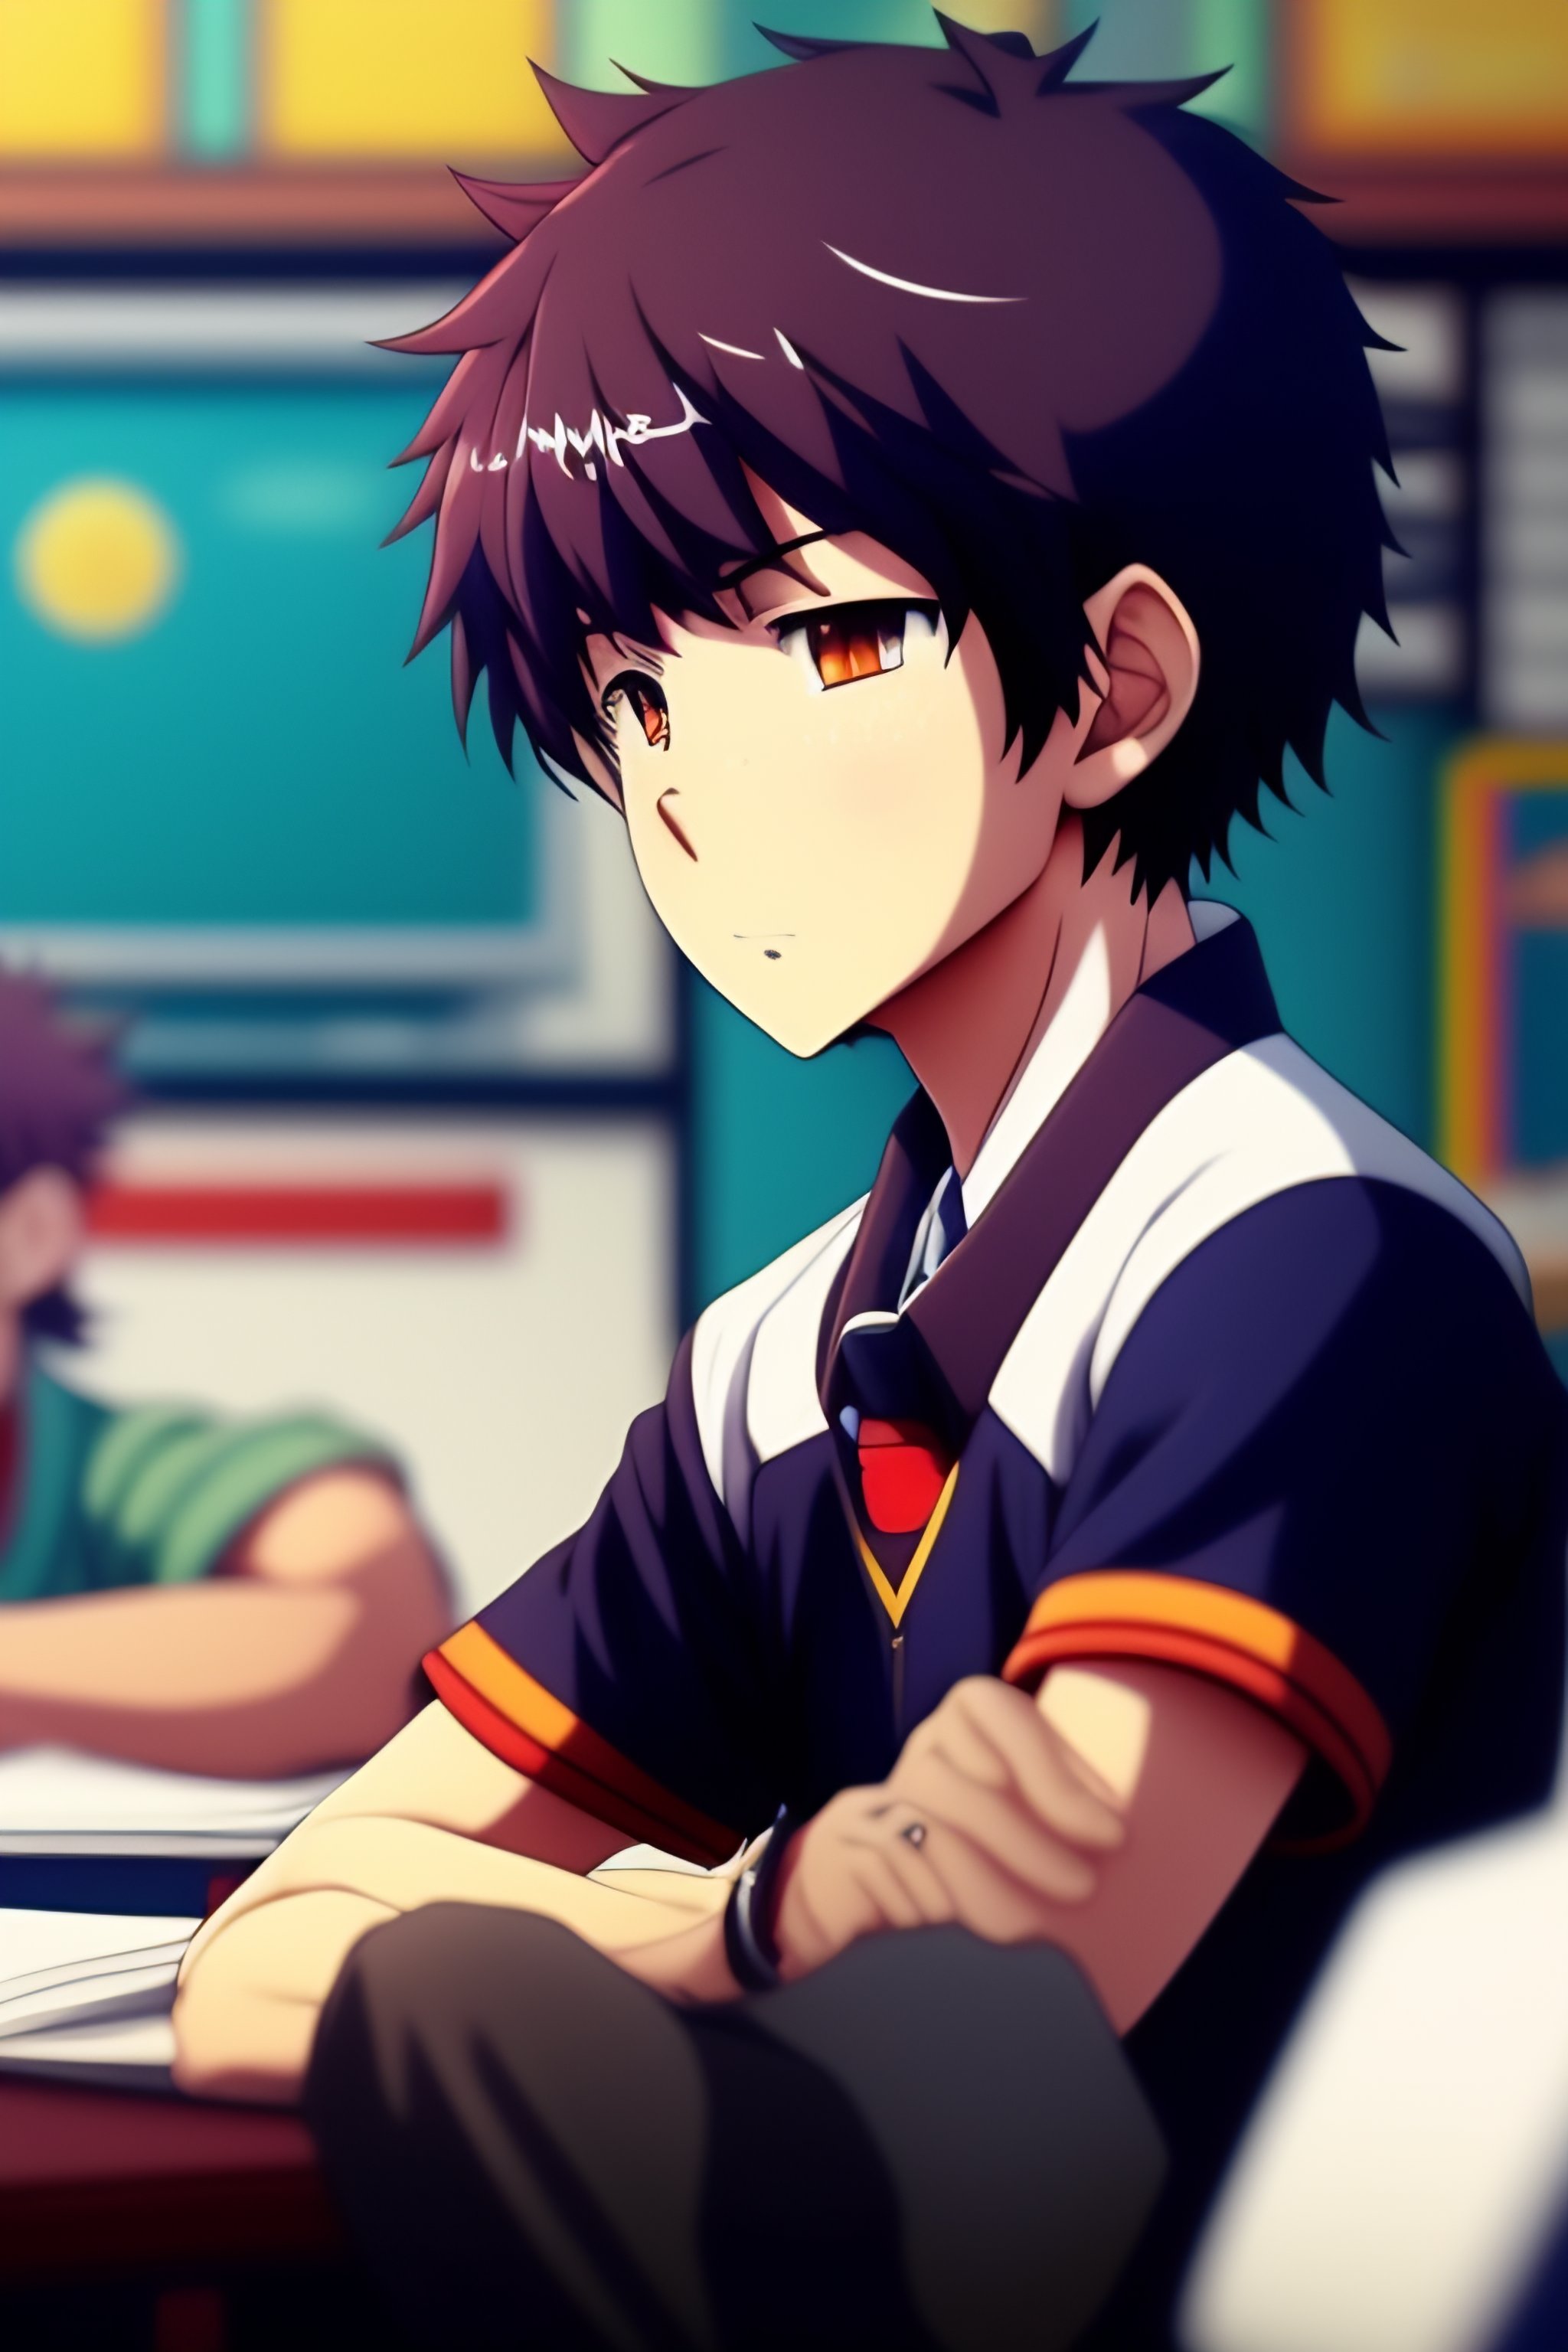 Pin by Any on Boys ⚓  Anime, Anime classroom, Anime images